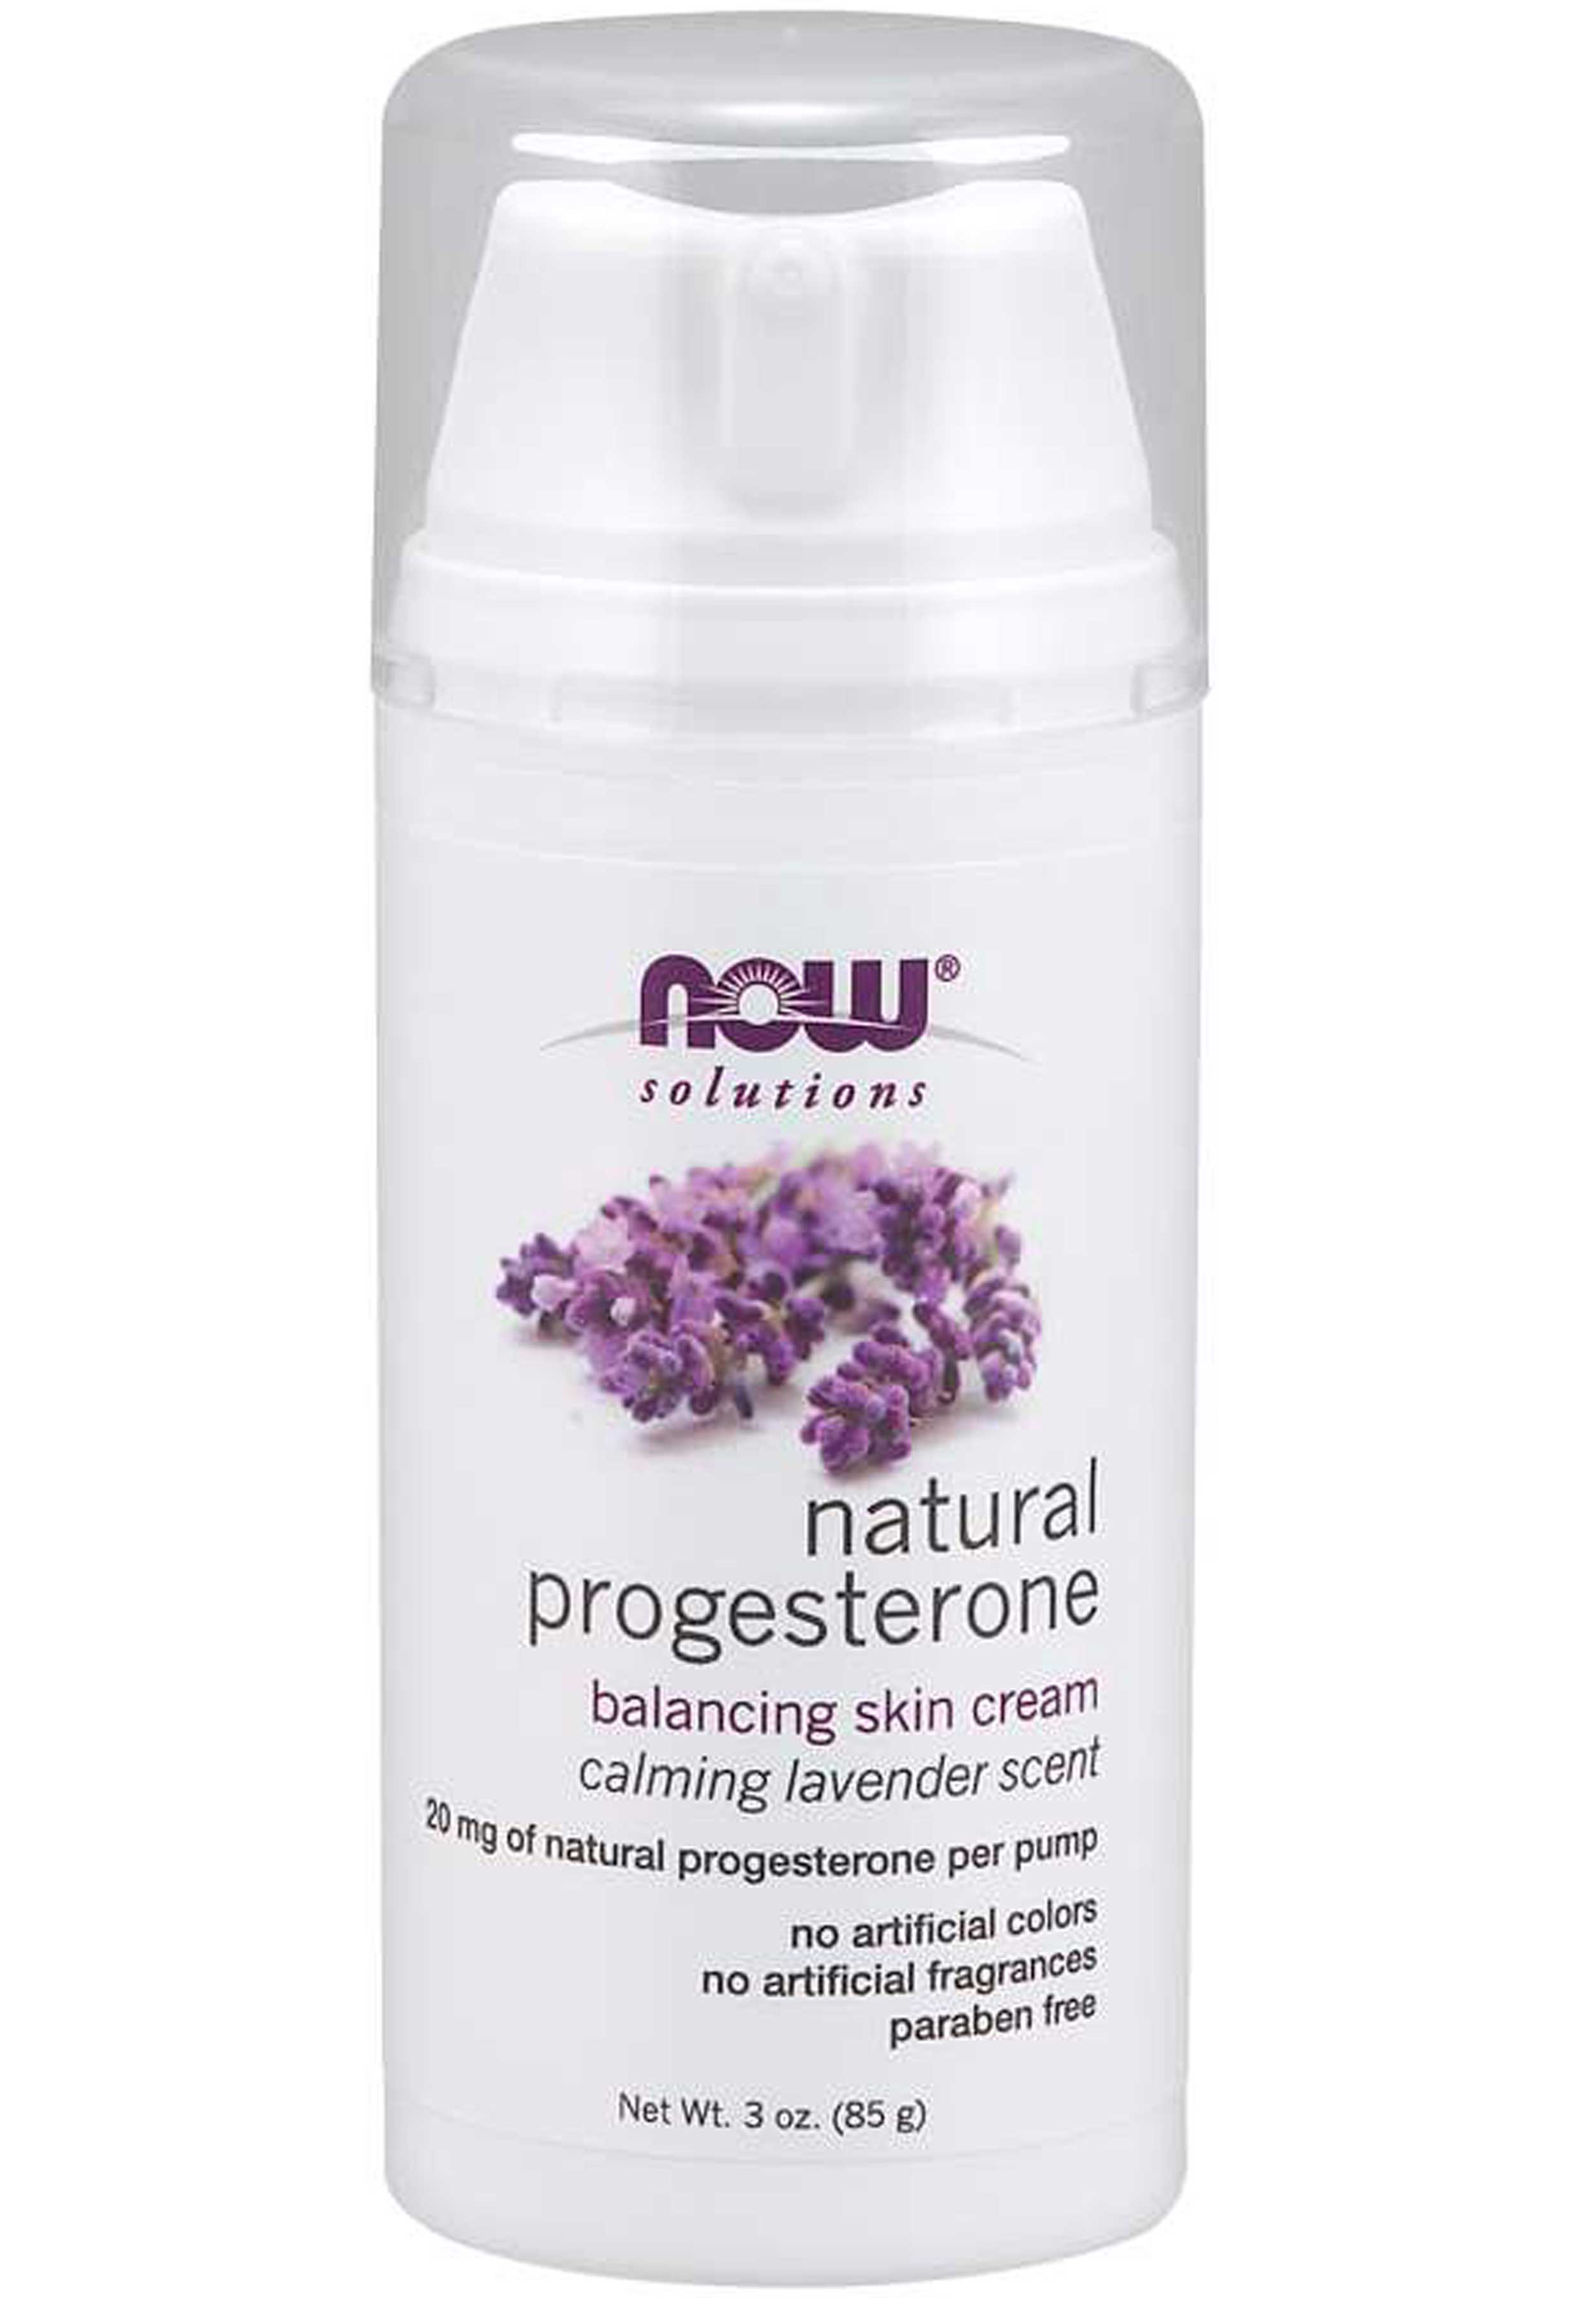 NOW Solutions Natural Progesterone Cream, Lavender